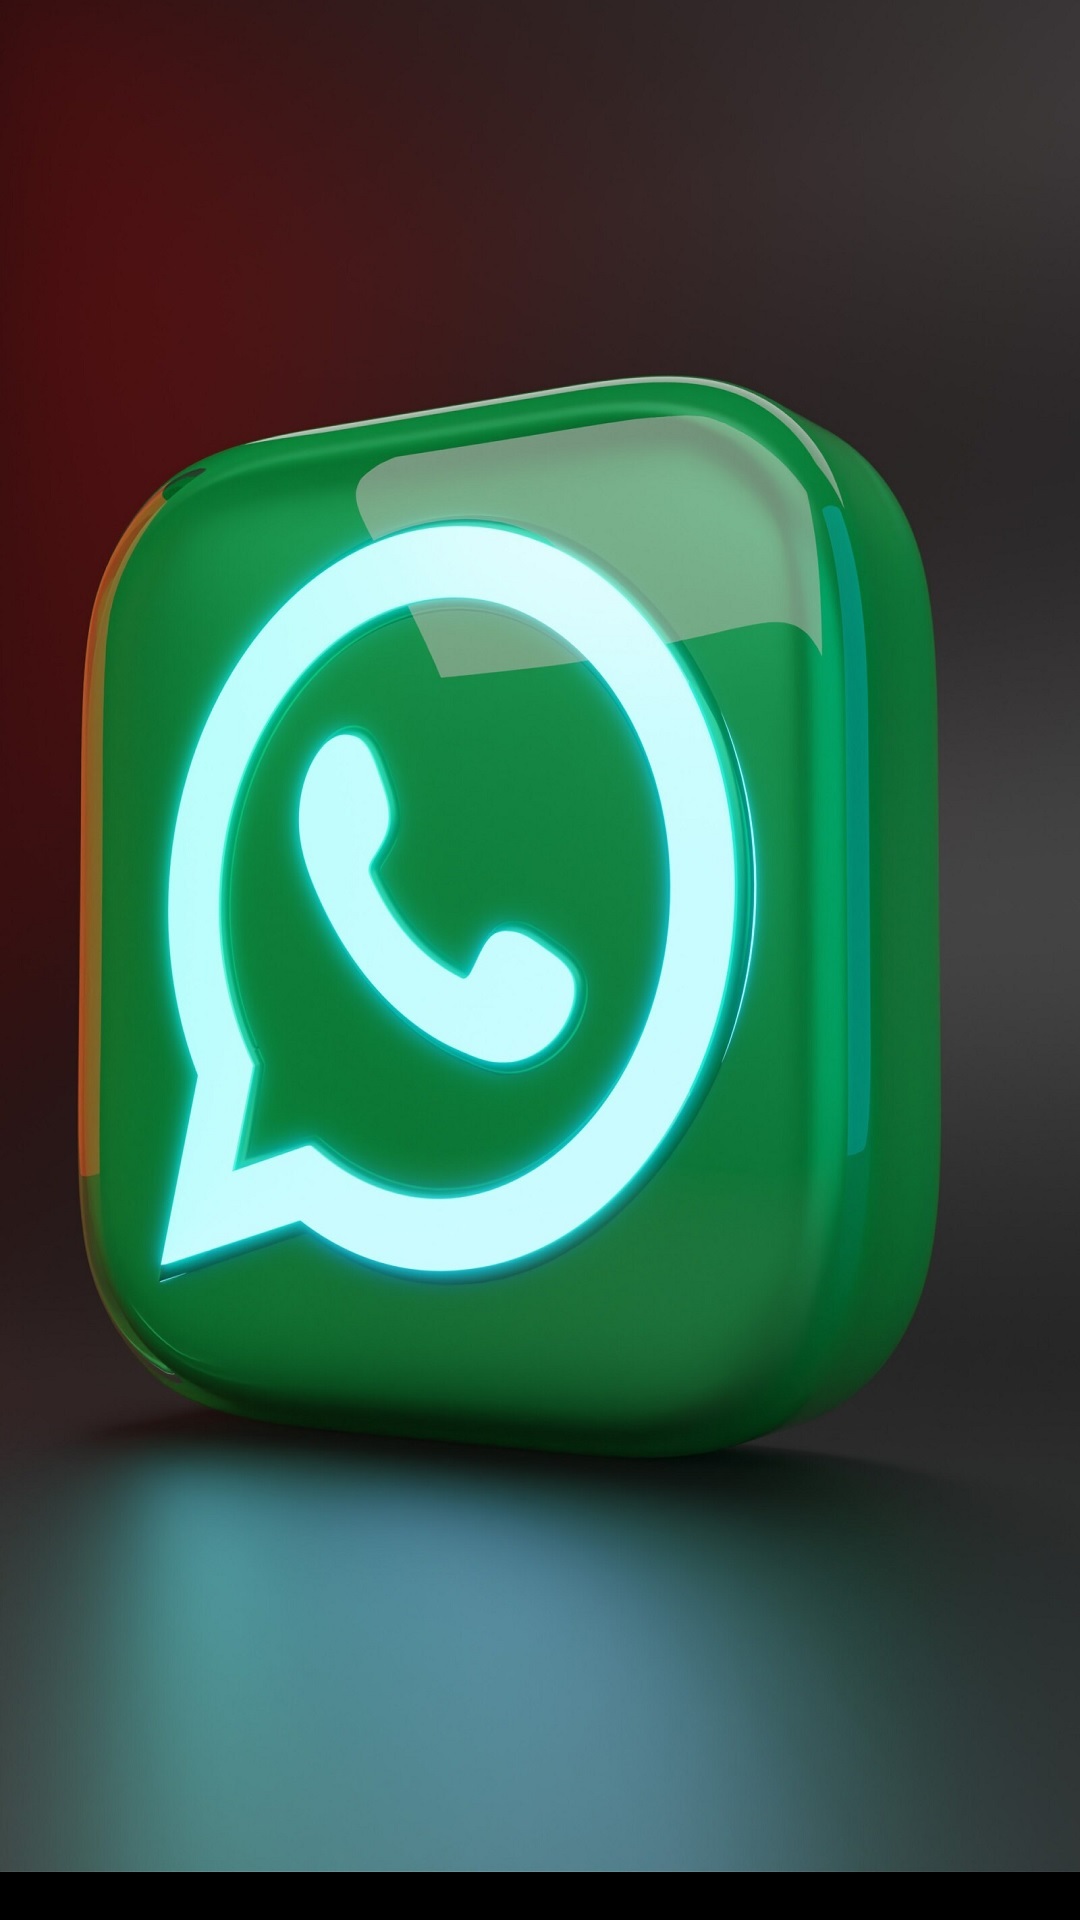 Learn how to send HD photos on WhatsApp: Step-by-step guide 
